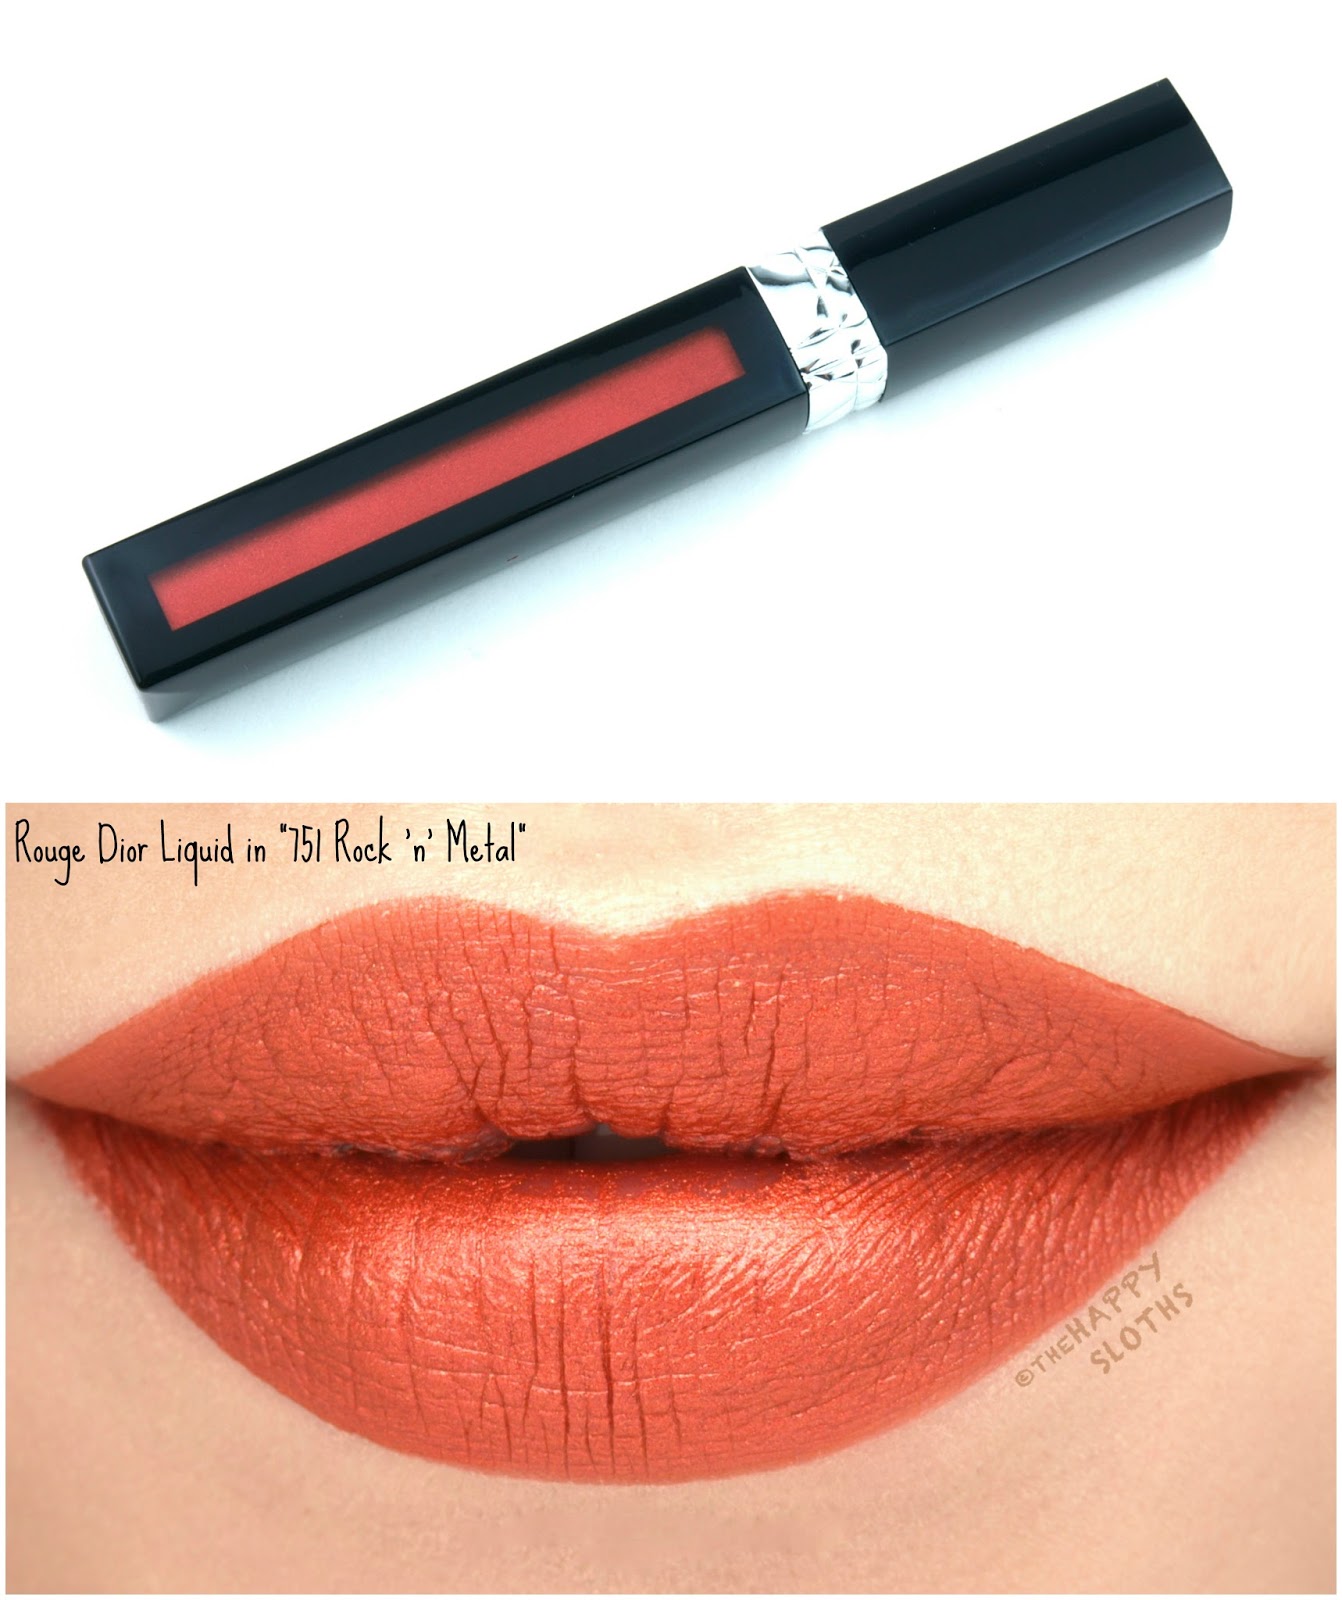 Dior Rouge Dior Liquid Lip Stain in "751 Rock n Metal": Review and Swatches